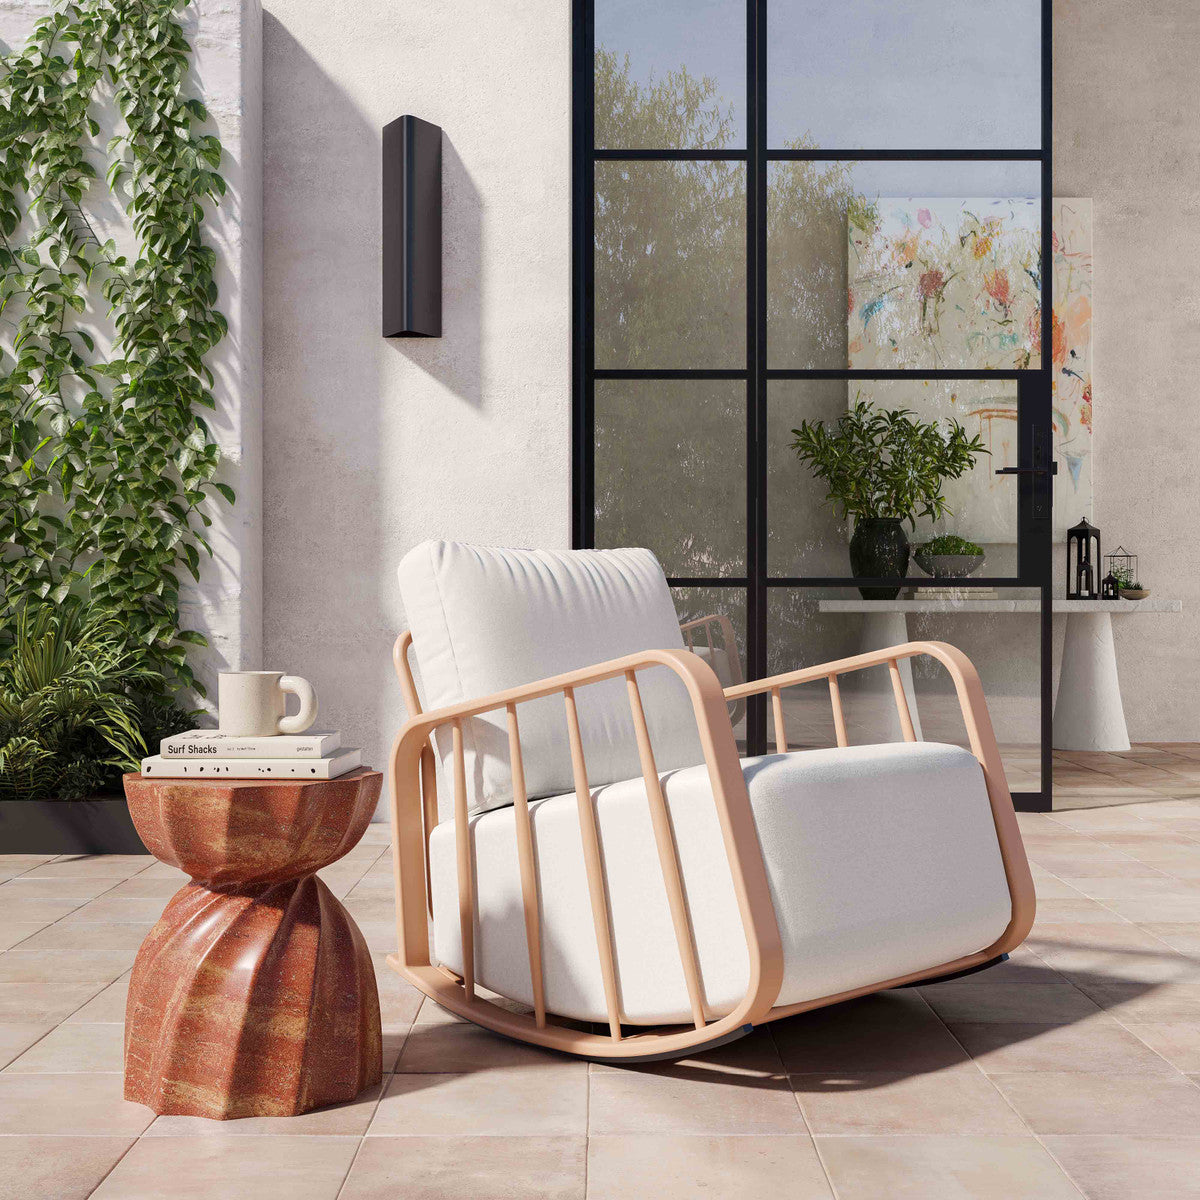 Violette Terracotta and Cream Outdoor Rocking Chair